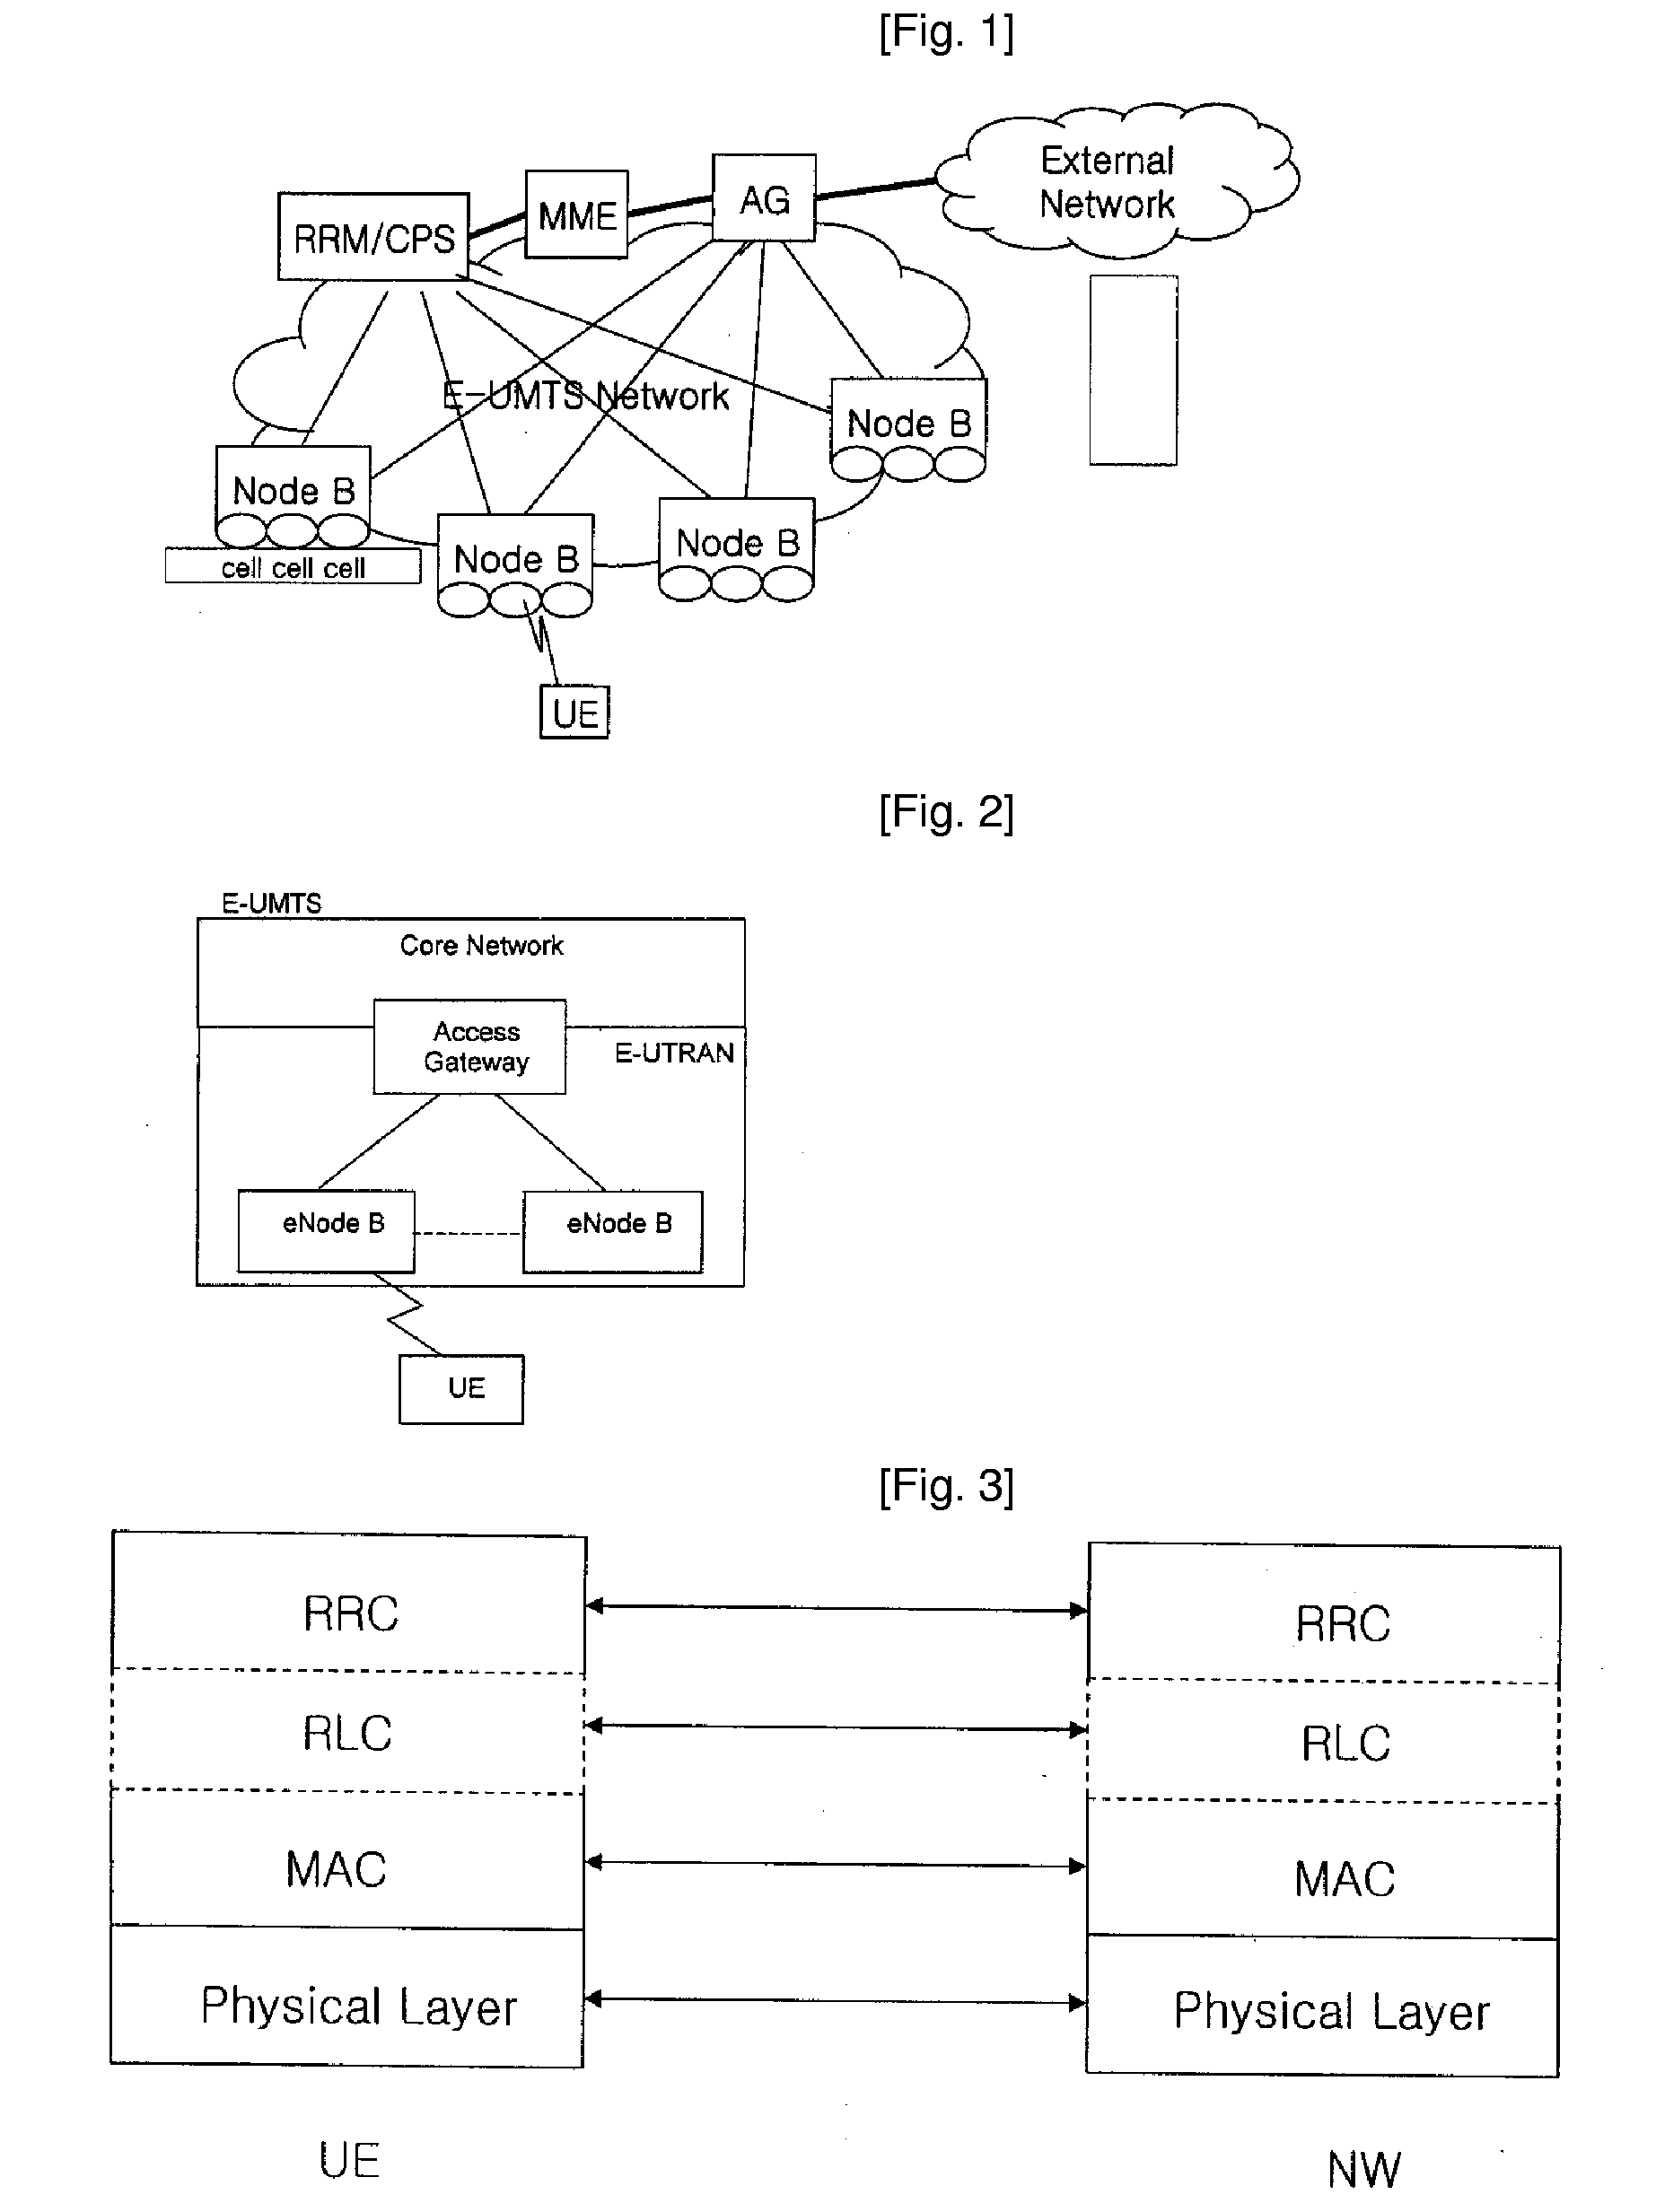 Data Transfer Management in a Radio Communications Network